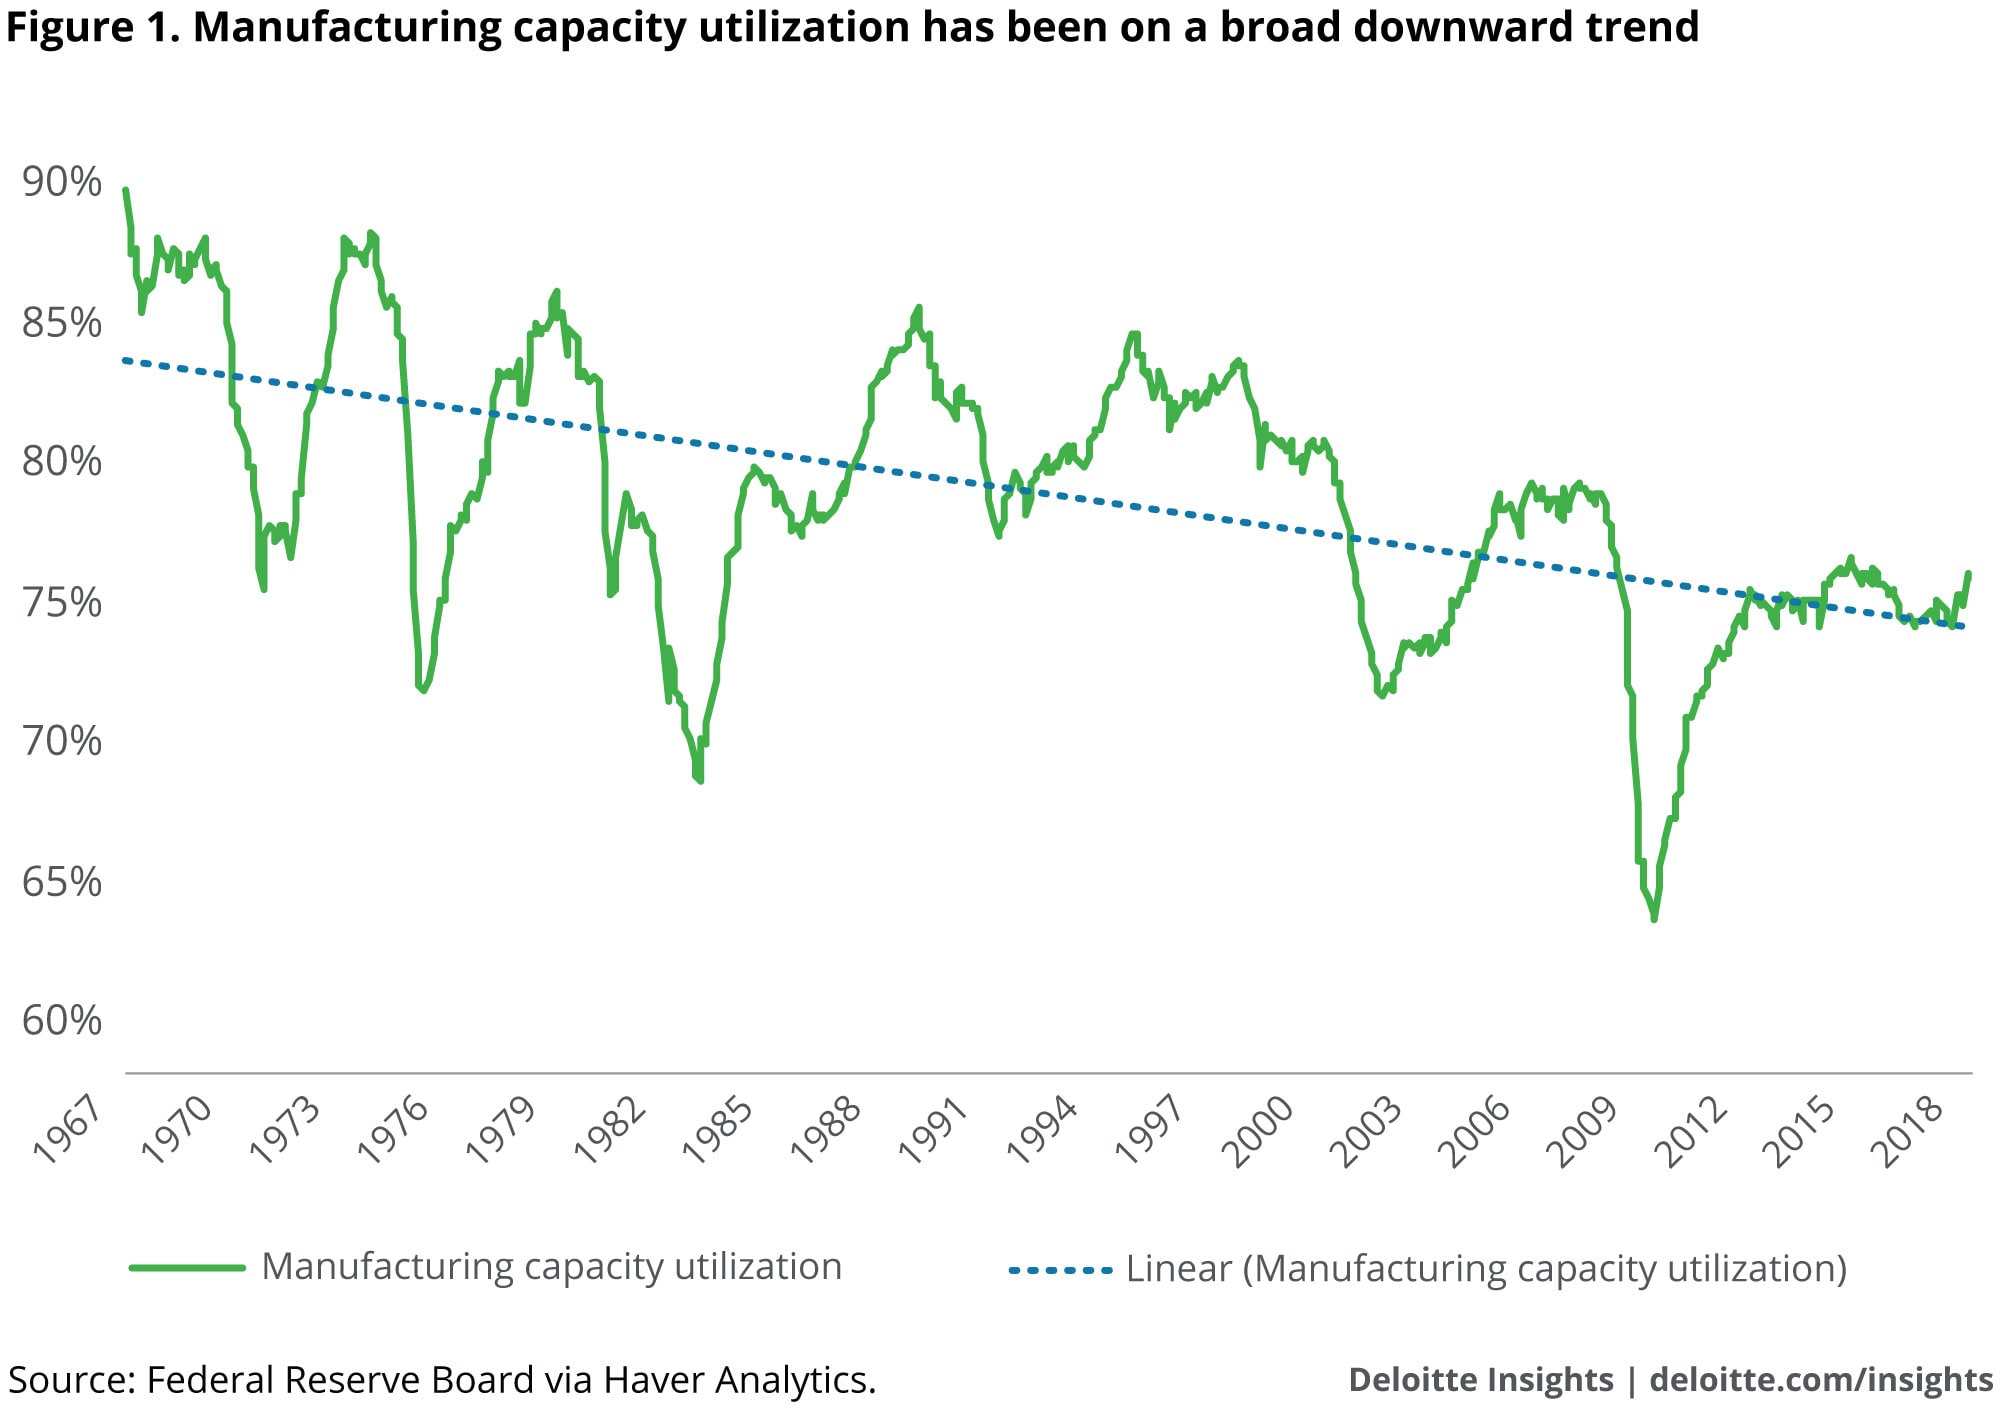 Manufacturing capacity utilization has been on a broad downward trend